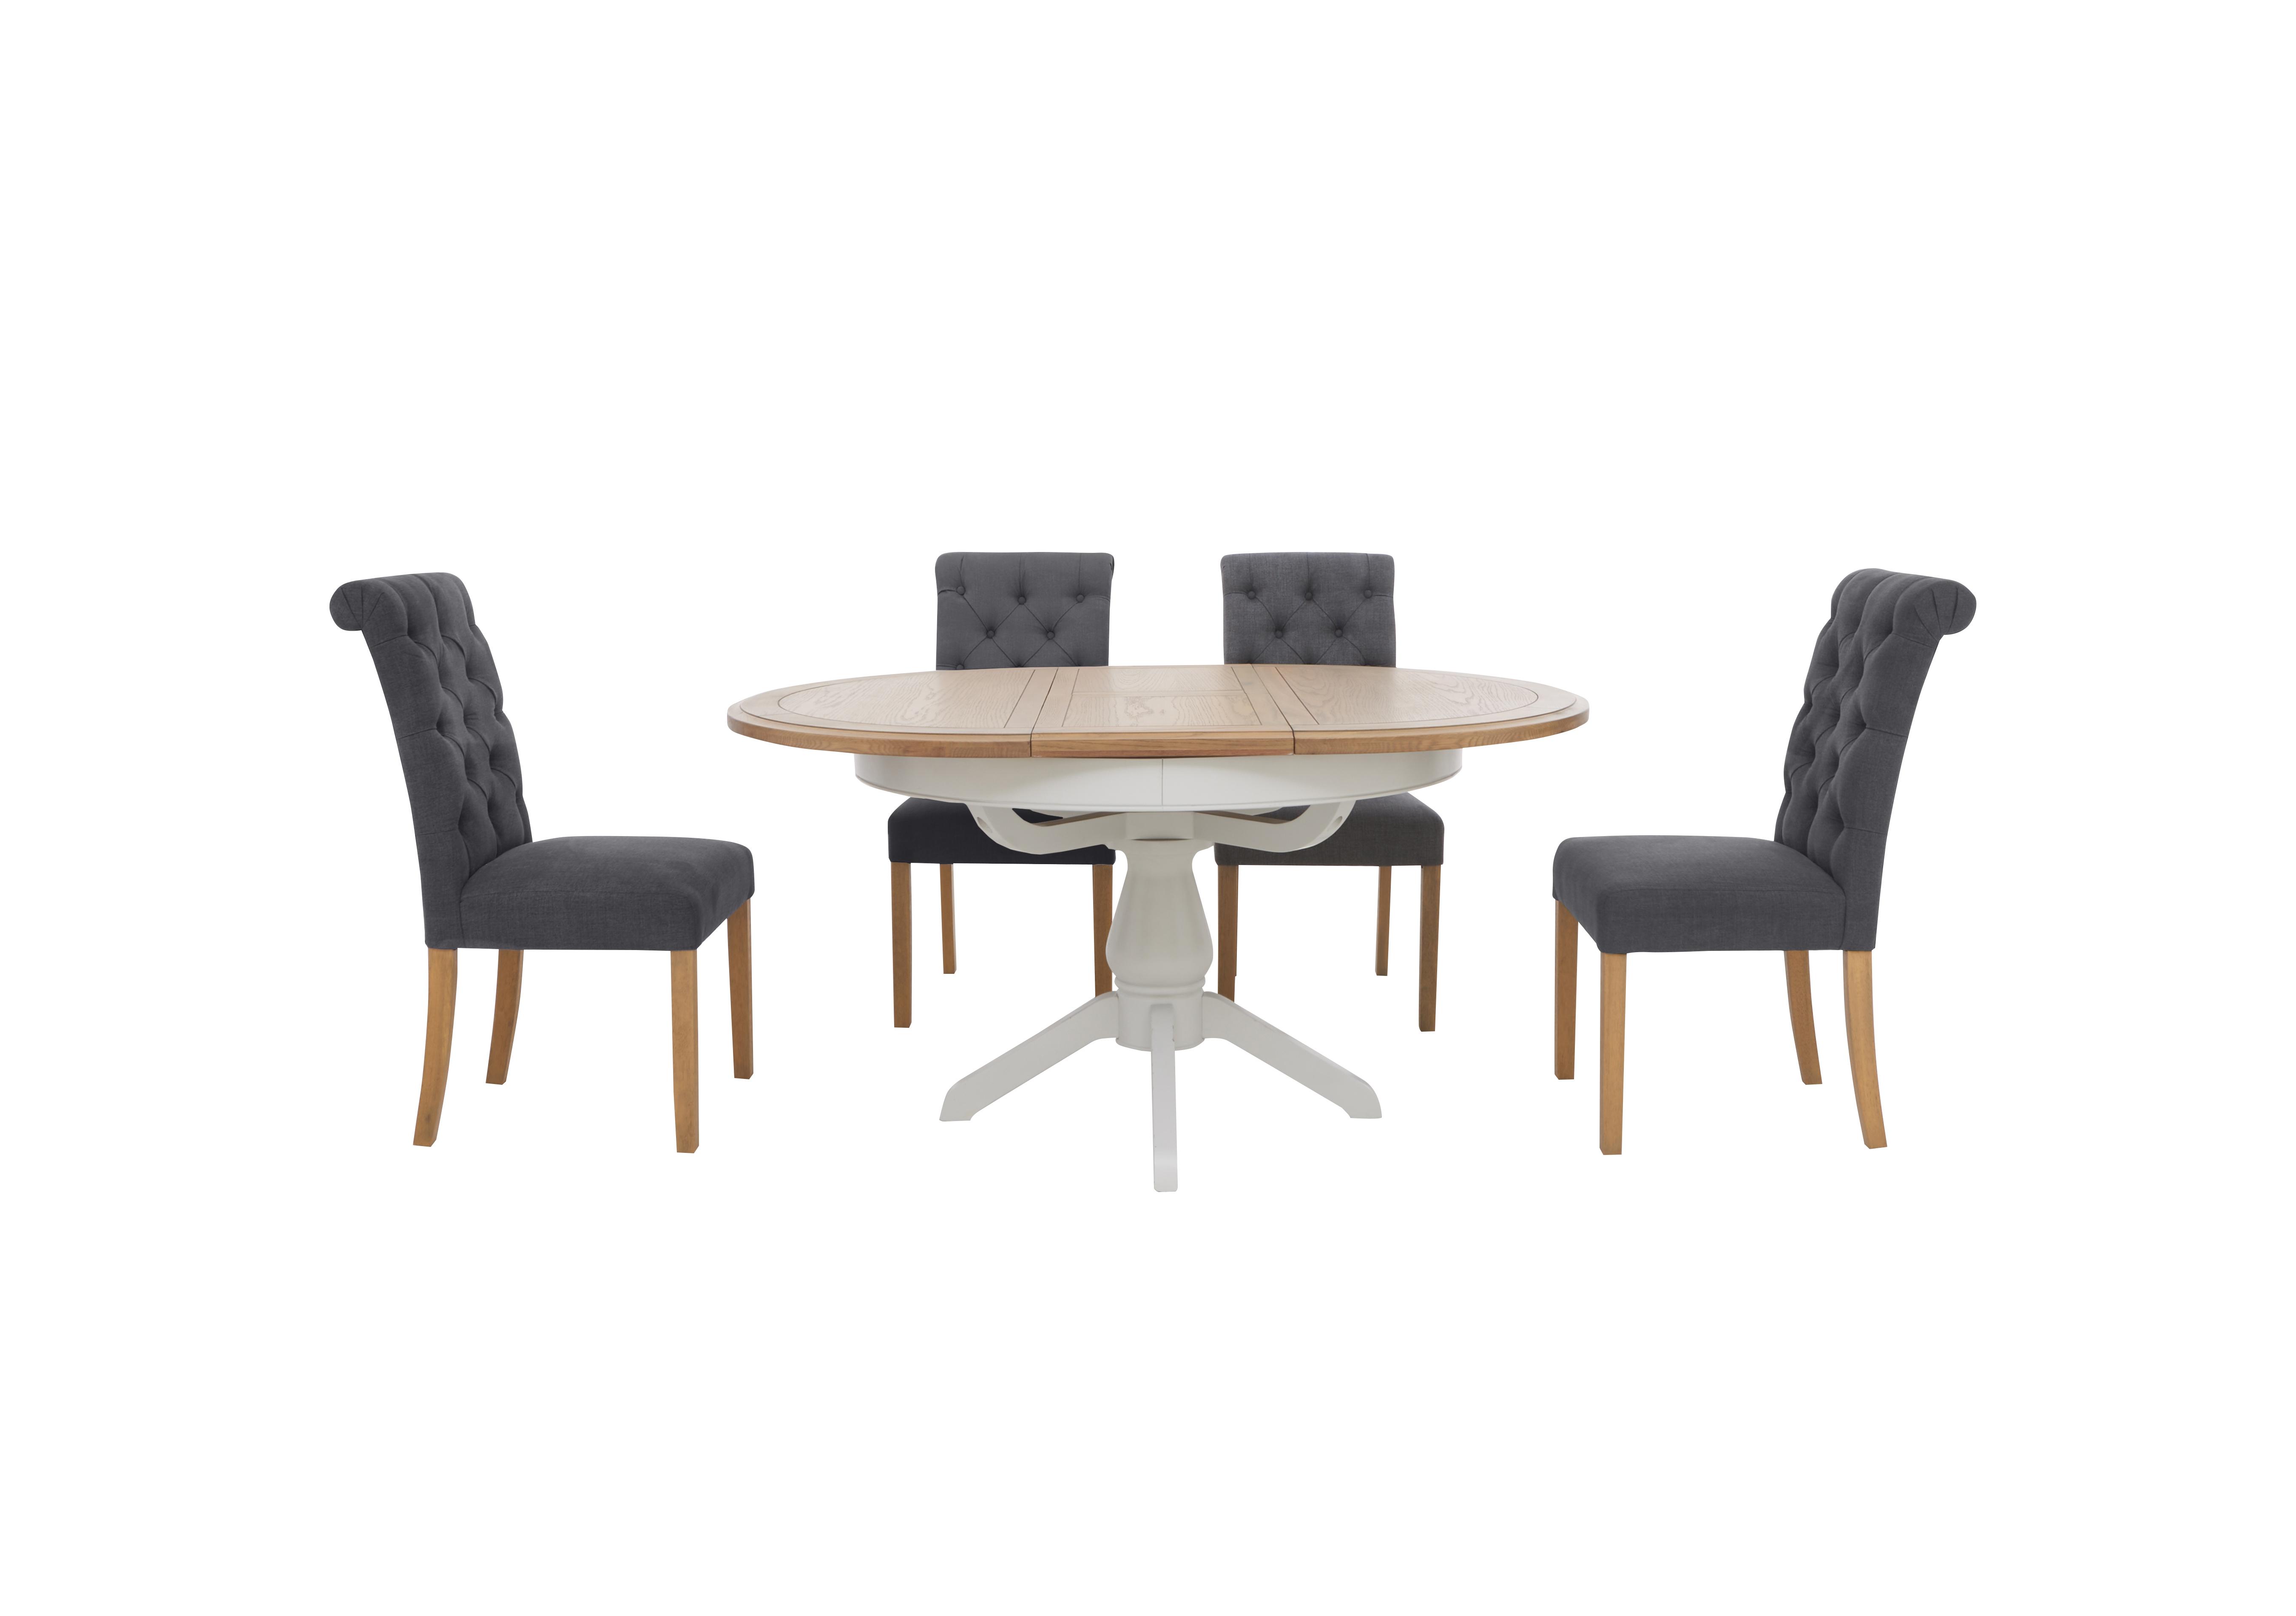 Hamilton Round Extending Dining Table and 4 Button Back Dining Chairs in Charcoal on Furniture Village